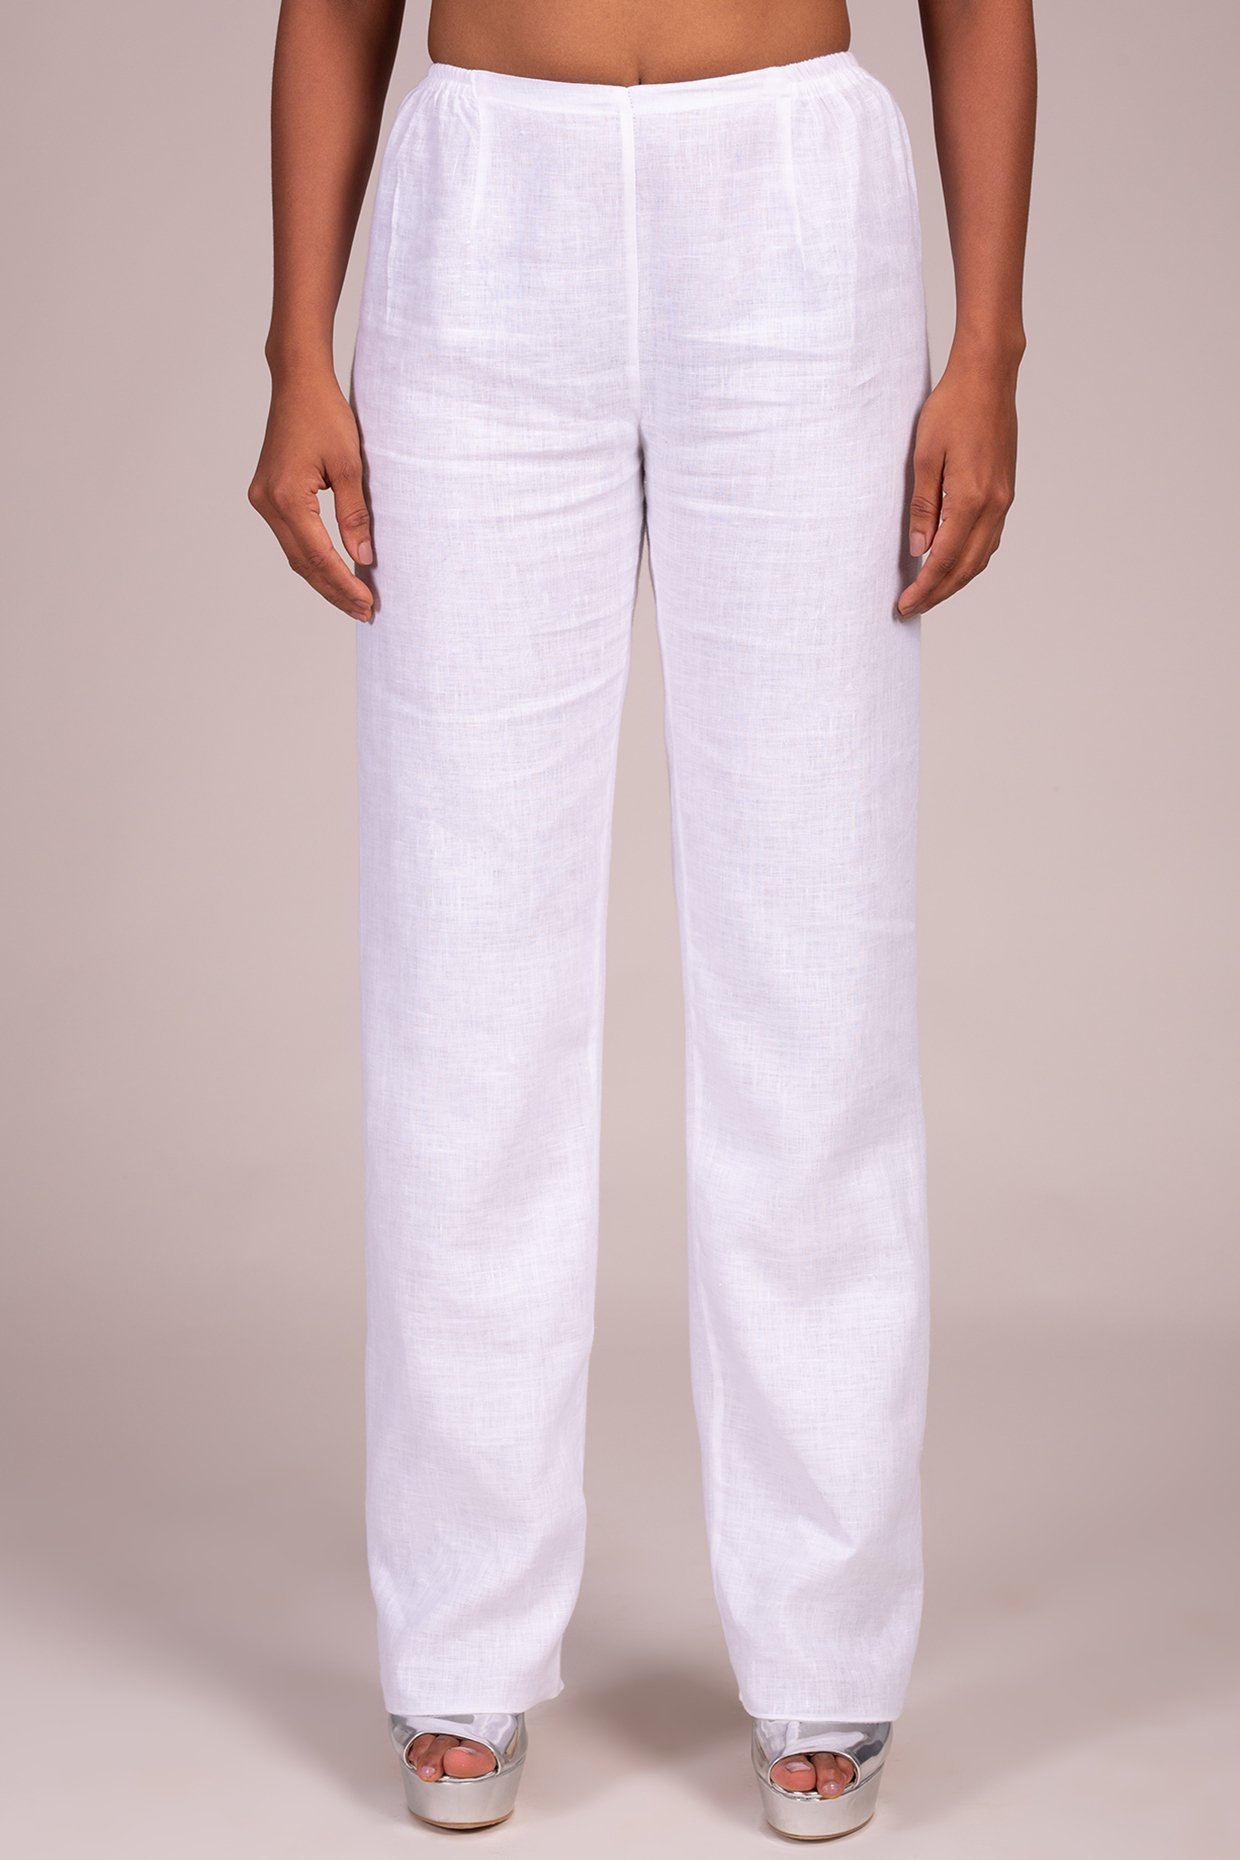 Buy Off White Trousers  Pants for Men by LINEN CLUB Online  Ajiocom